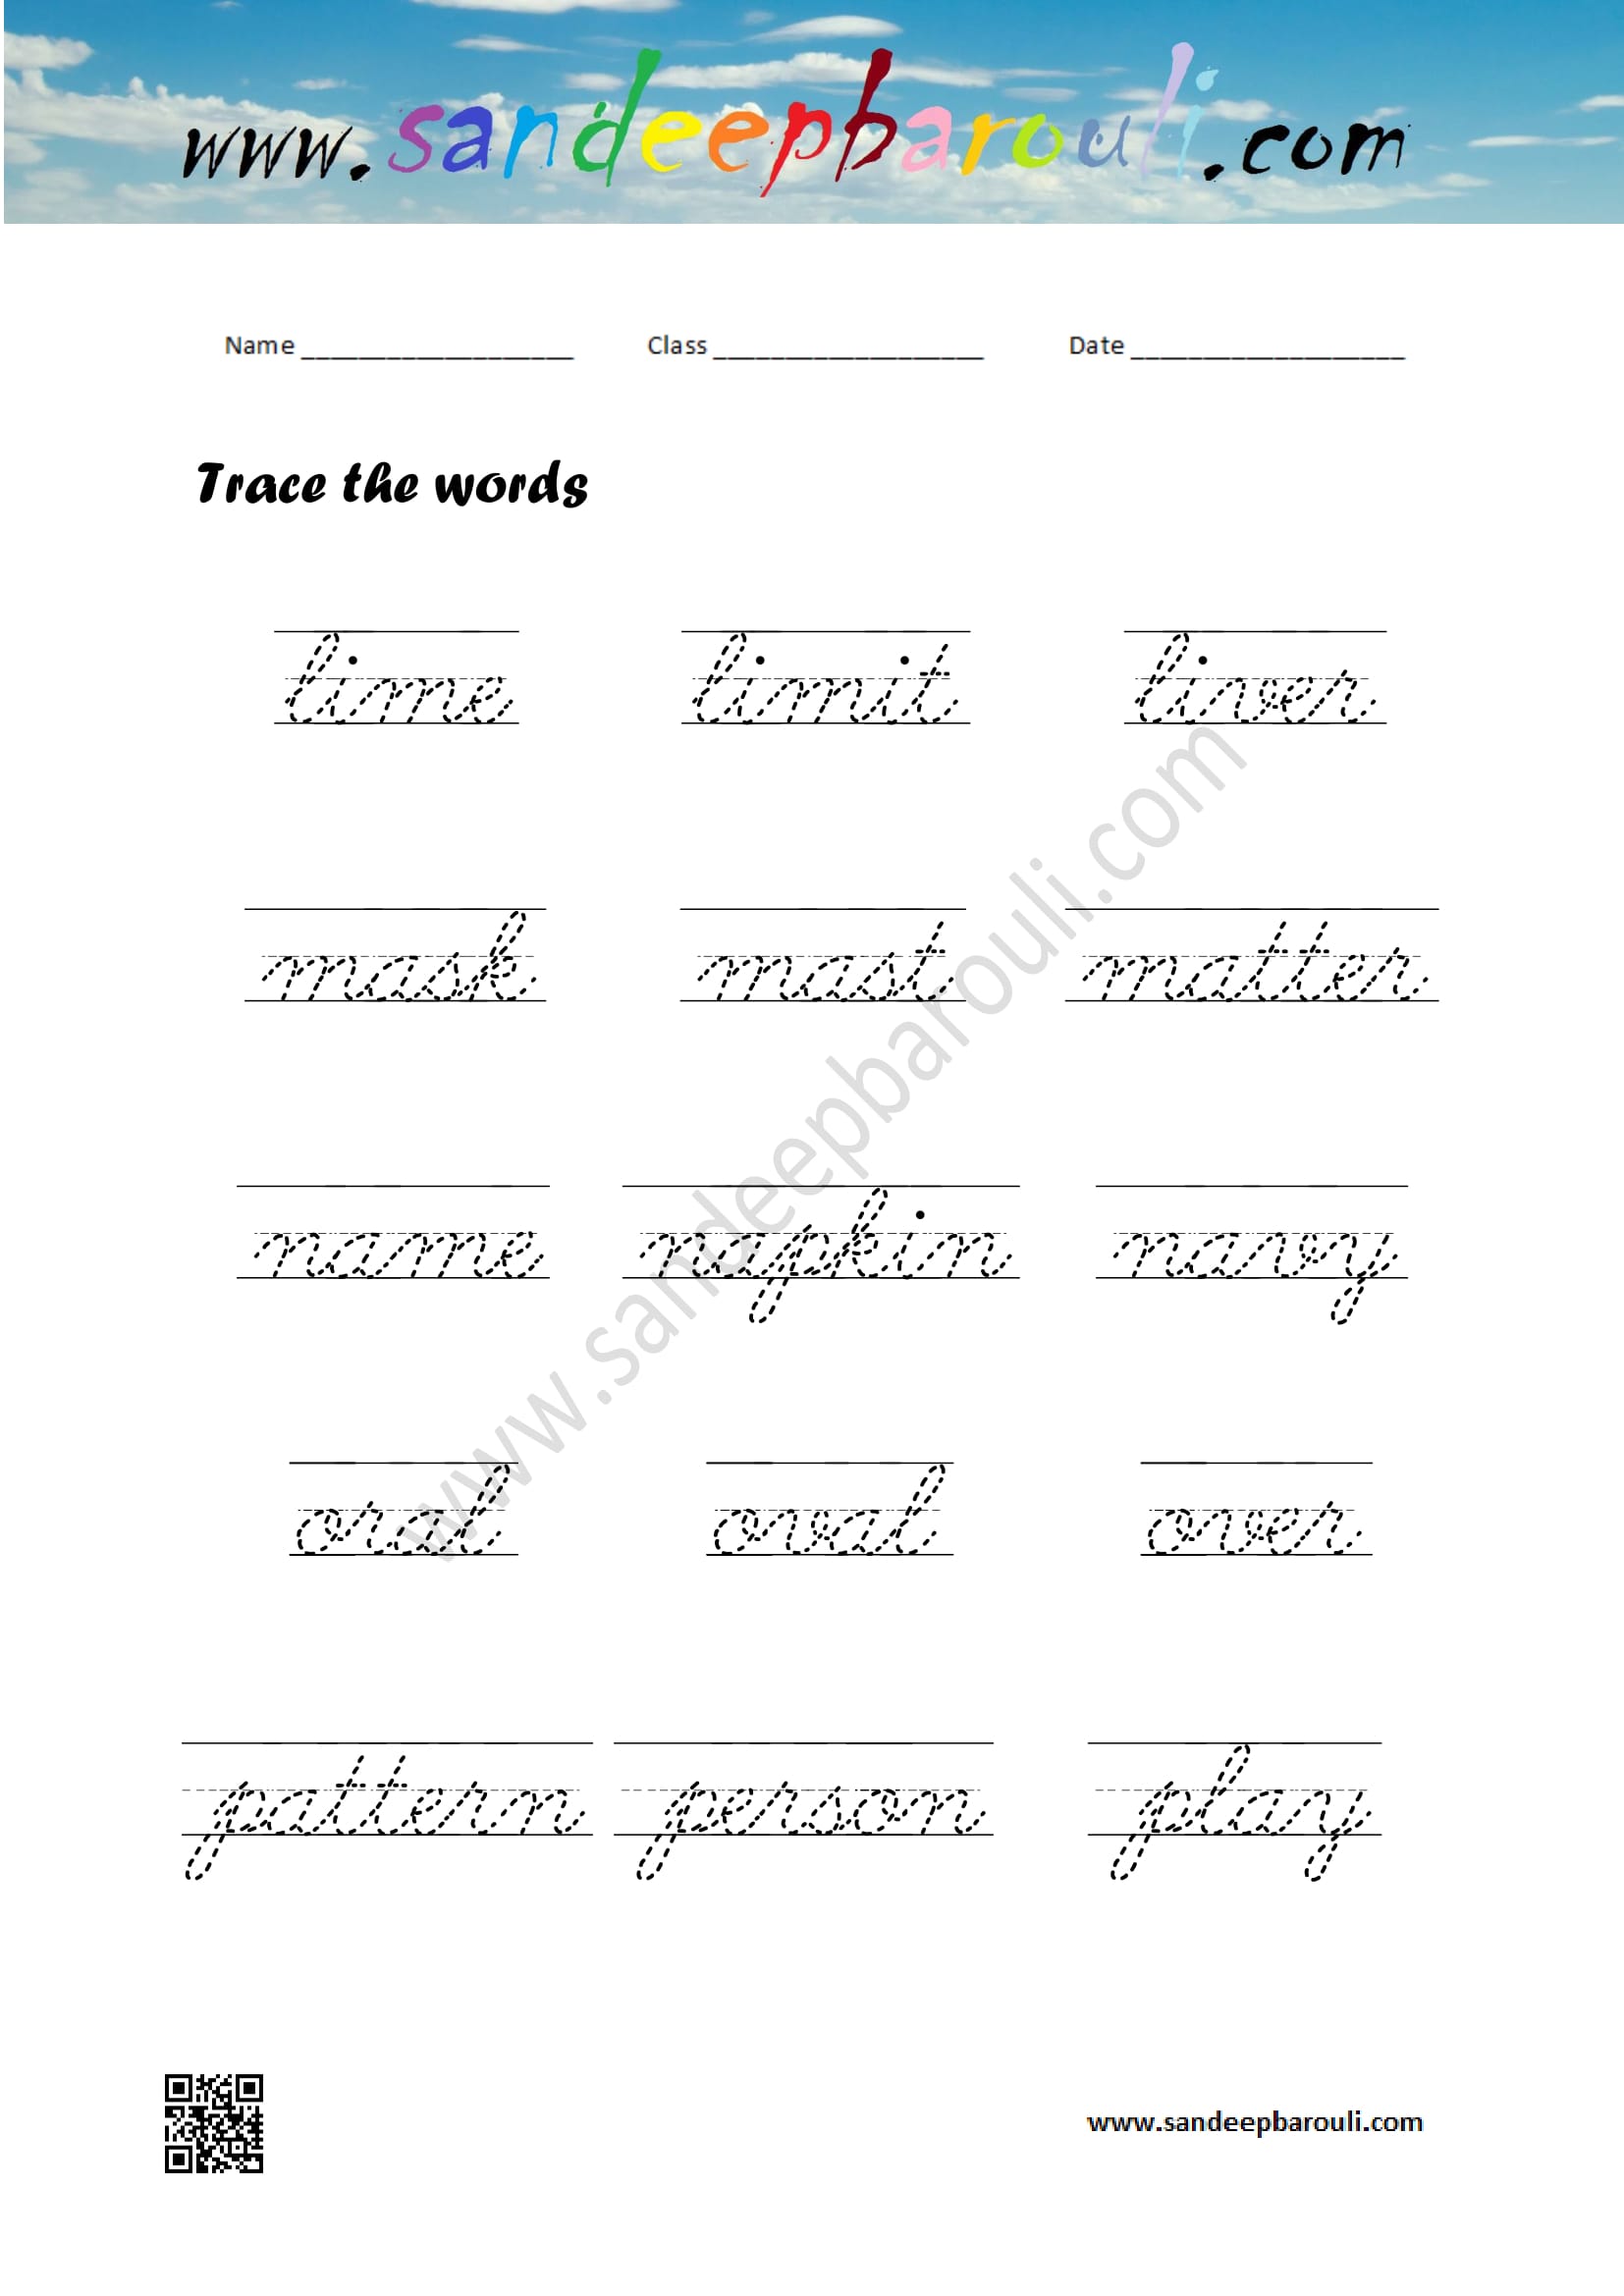 Cursive Writing Worksheet – Trace the words (25)